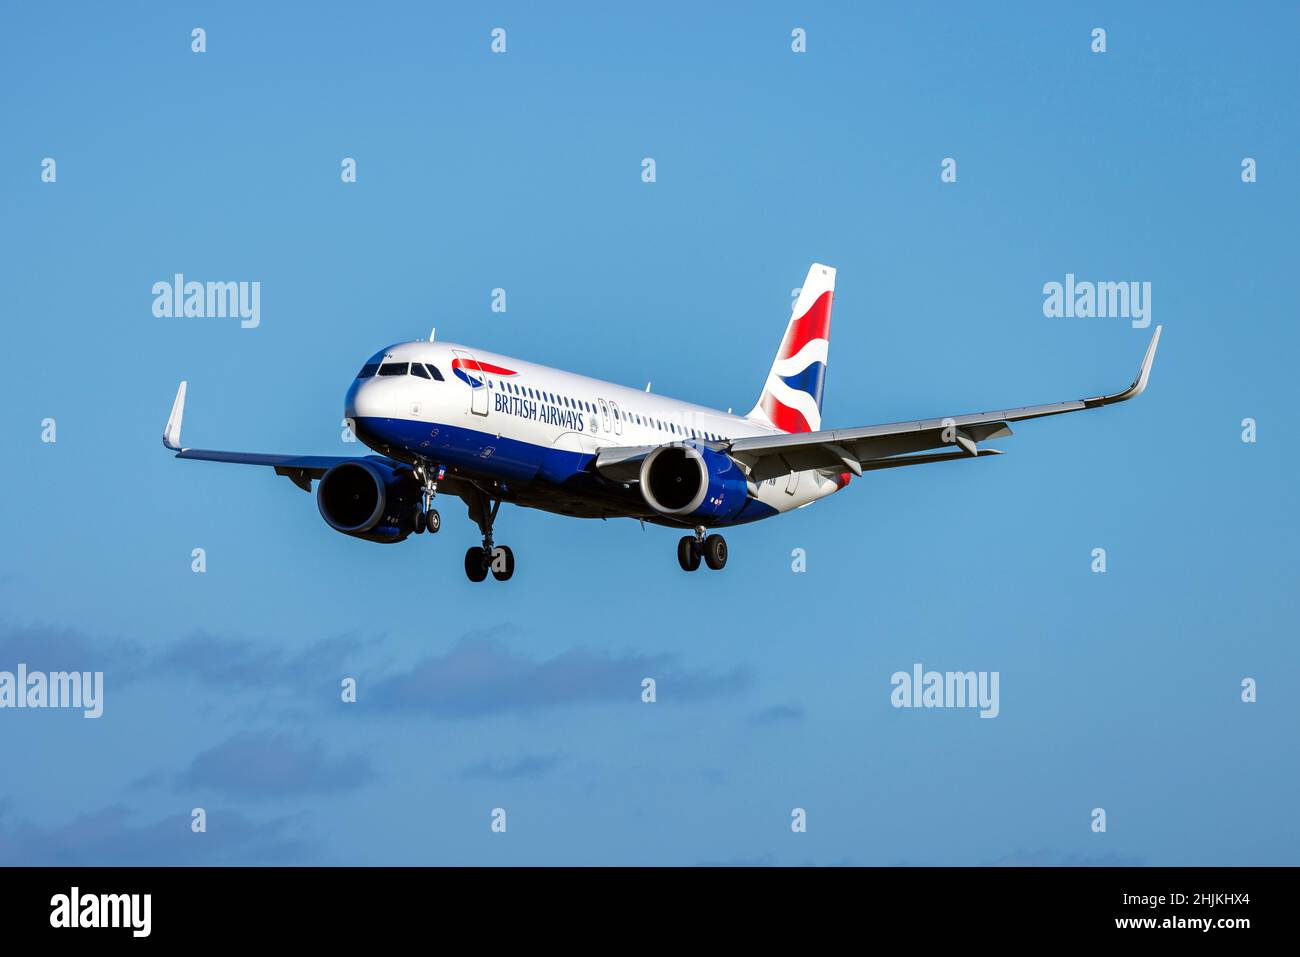 British Airways Airbus A320-251N (Reg.: G-TTNN) coming in for landing in the late evening. Stock Photo